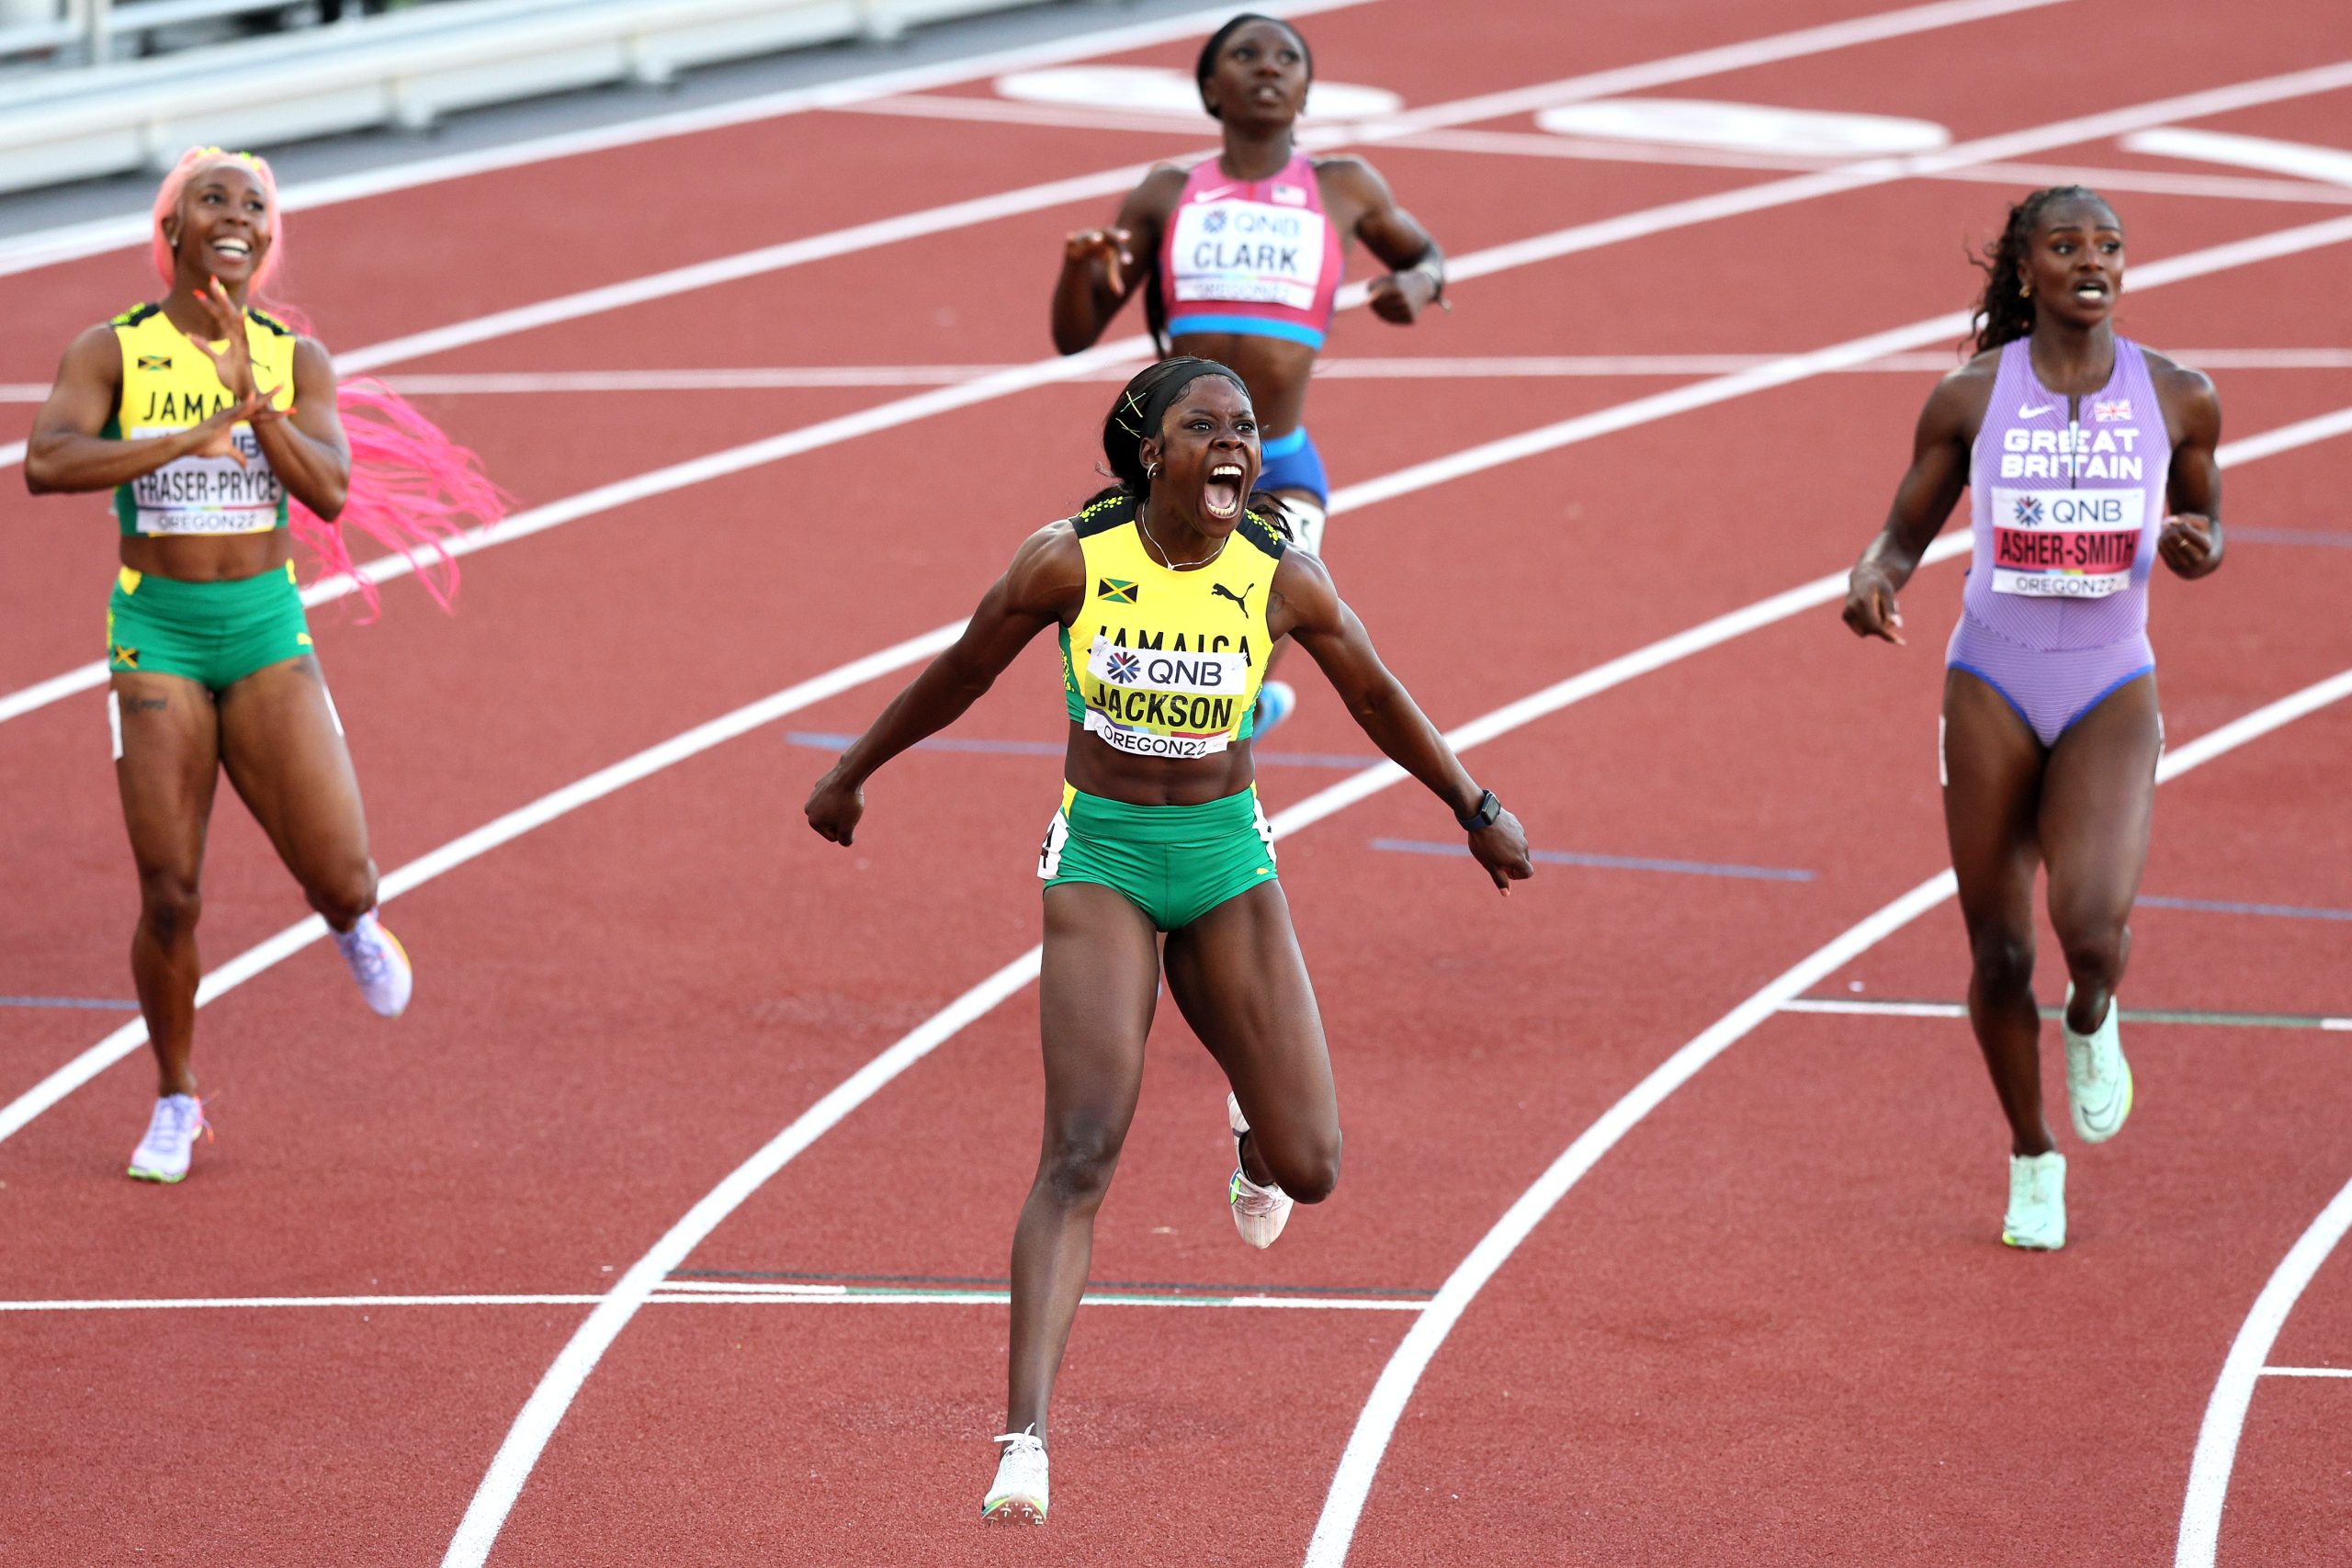 World 200m champion Shericka Jackson handed world champion Shelly-Ann Fraser-Pryce her first defeat in the 100m this season after the Jamaican clocked 10.73 seconds to secure the narrow victory over her fellow countrywoman at the Brussels 2022 Diamond League meeting on Friday (2).